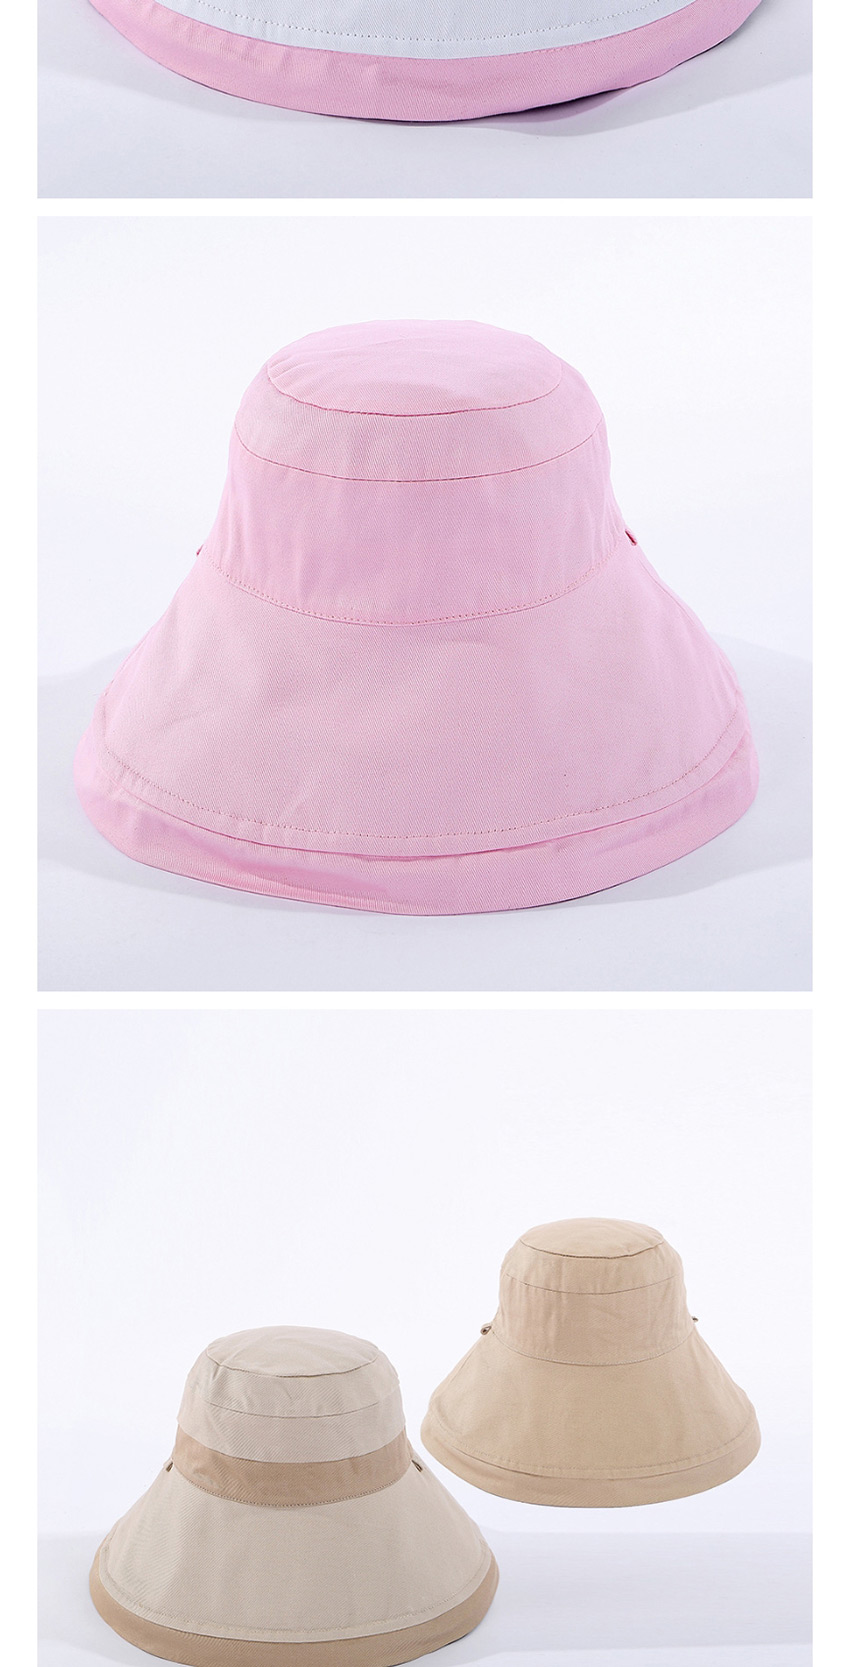 Fashion White + Pink Color-block Double-sided Fisherman Hat,Sun Hats